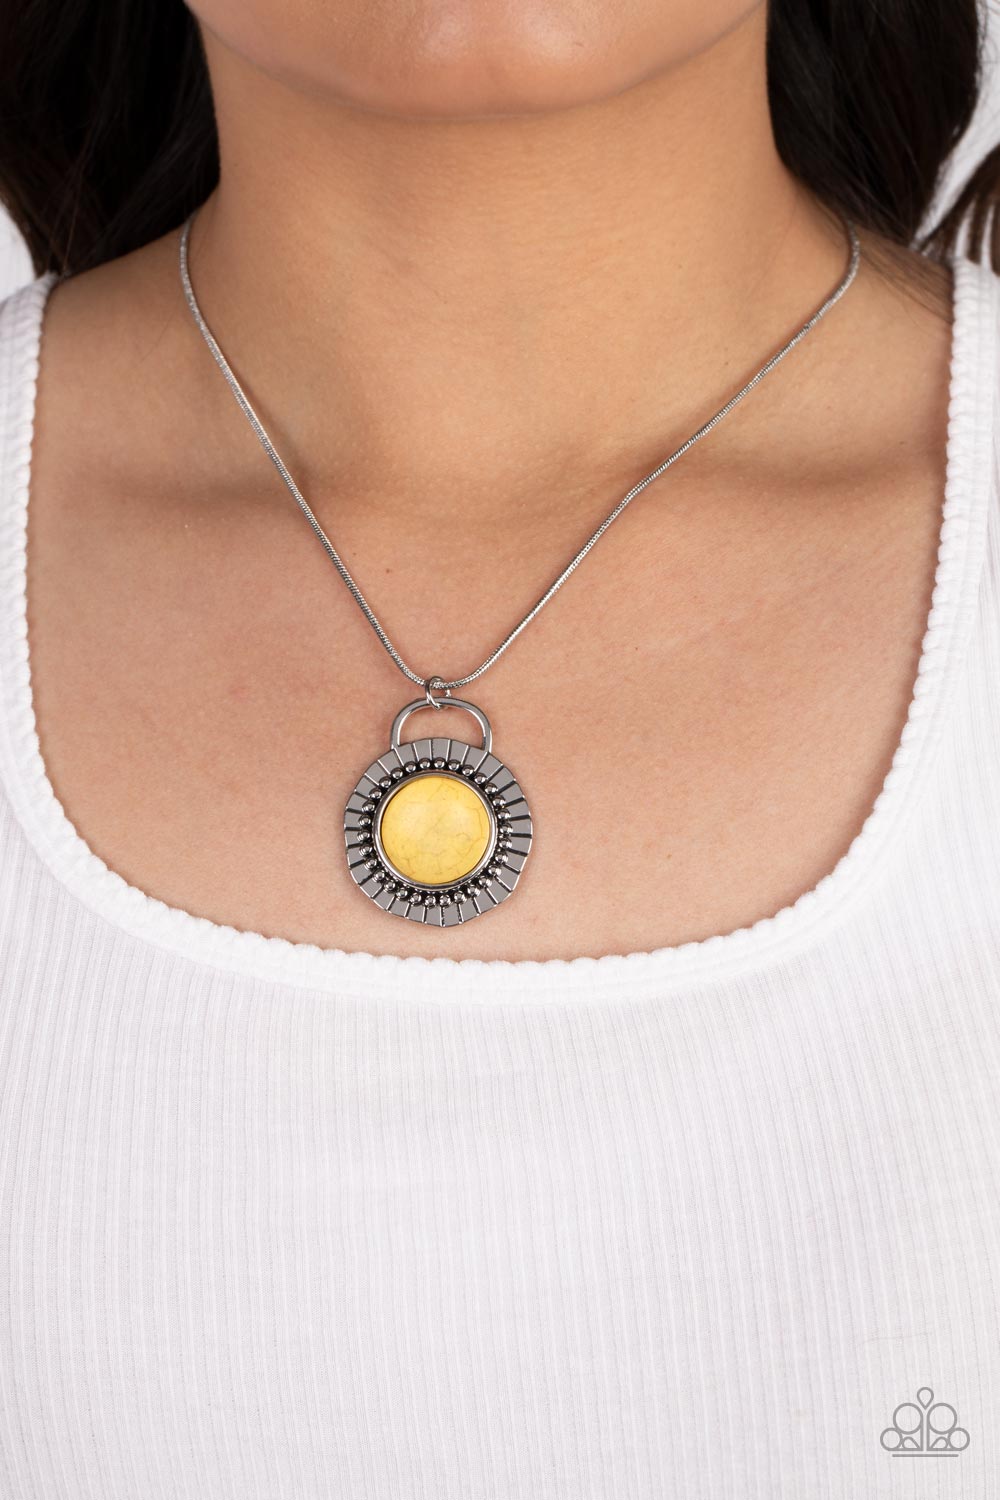 New Age Nomad Yellow Stone Necklace - Paparazzi Accessories- lightbox - CarasShop.com - $5 Jewelry by Cara Jewels